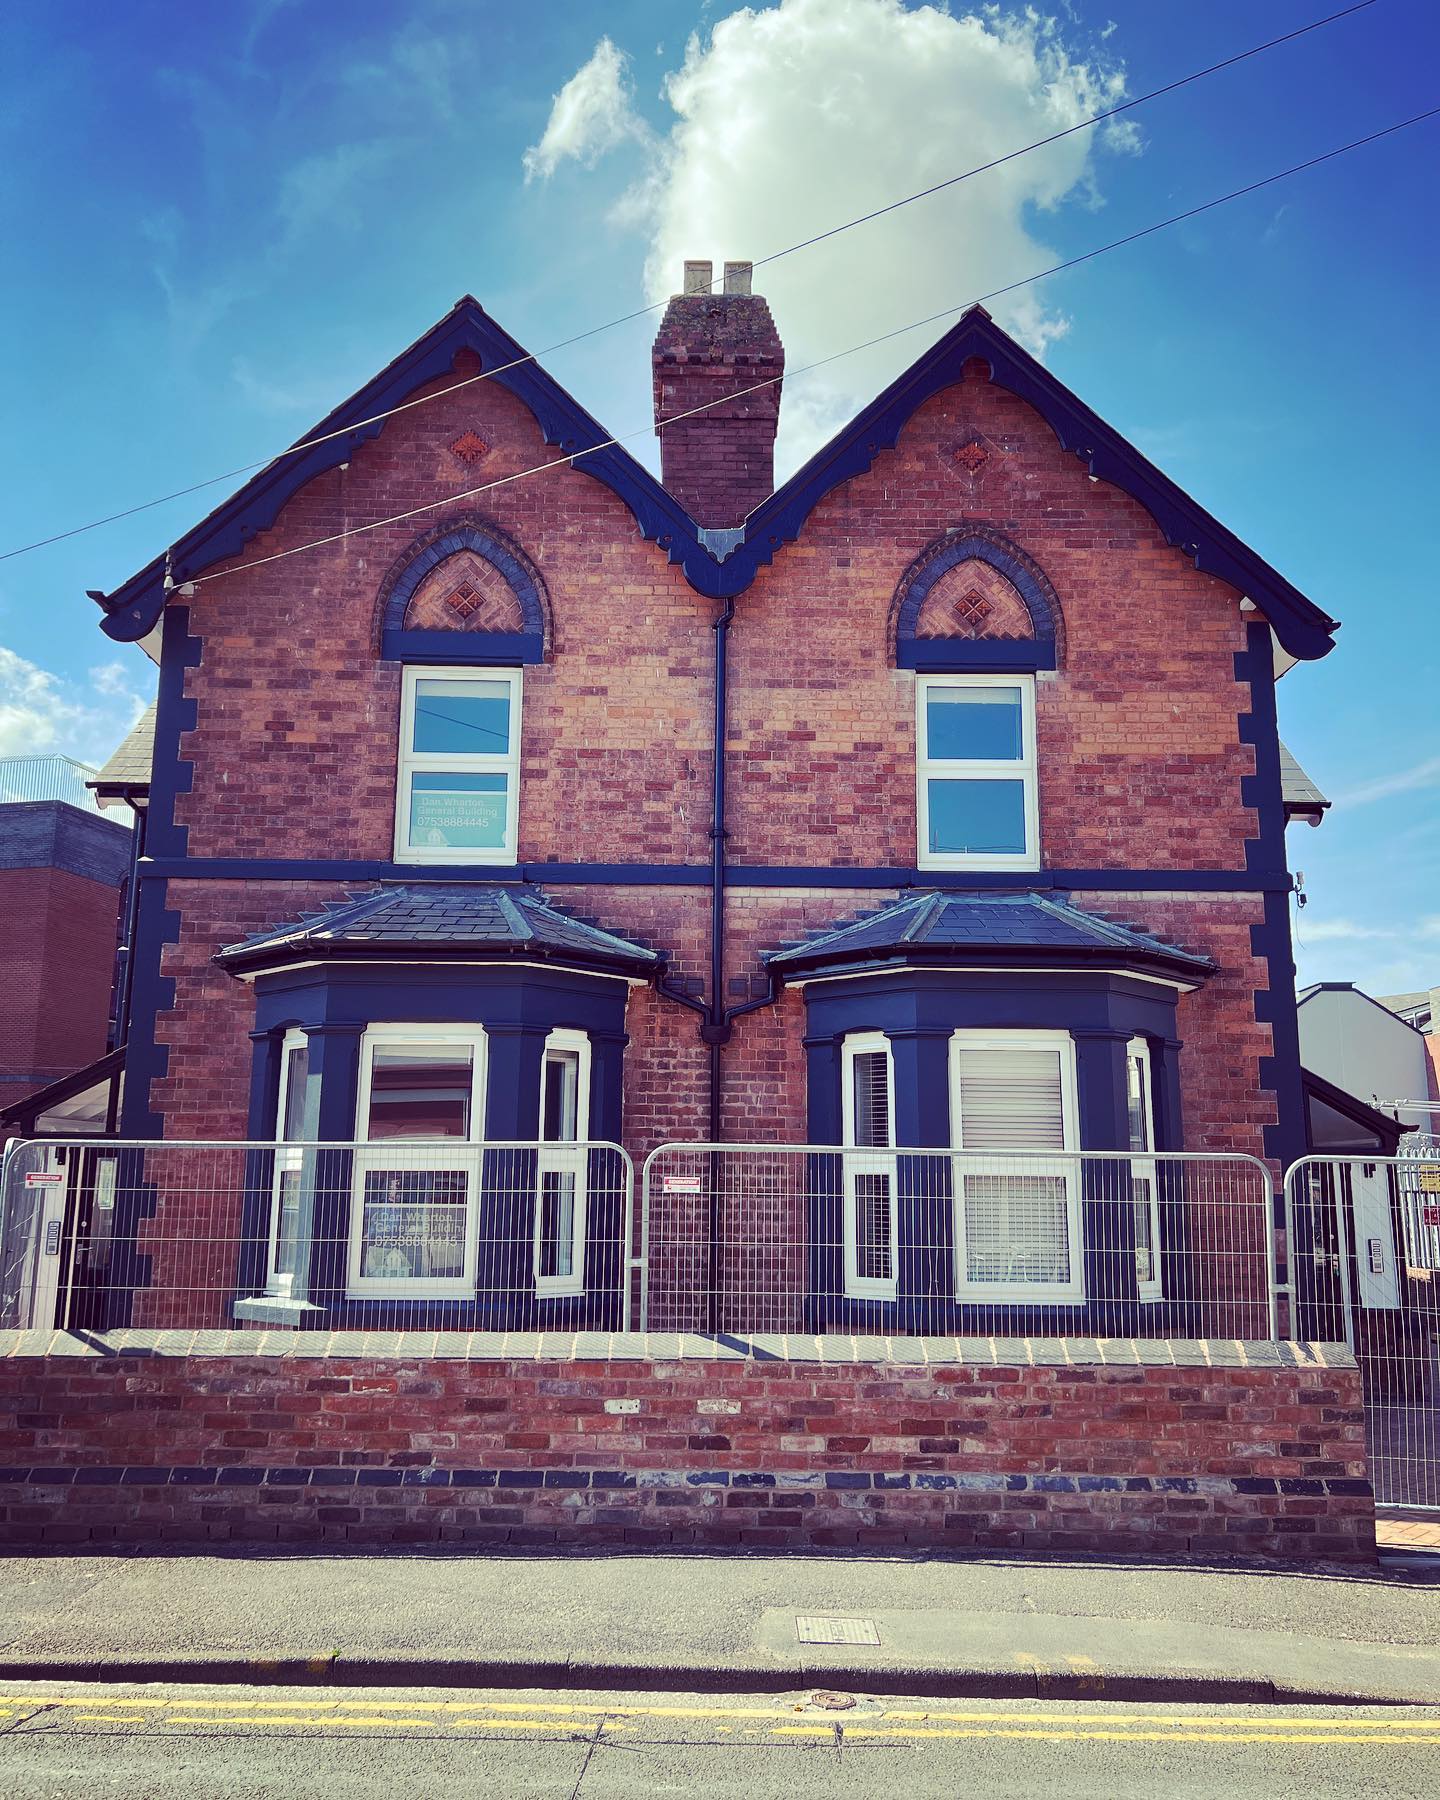 Carried out a snagging inspection of No’s 4 & 5 Blackfriars Street today ahead of the final handover. The project was undertaken with #herefordshire Council to refurbish two derelict buildings to provide much needed housing for vulnerable adults giving them a safe home, independence and self-sufficiency. A worthy re-use of an otherwise empty building. 👏

#refurbished #herefordarchitects #newhome #hereford #edwardianhouse #completedproject #worthycause